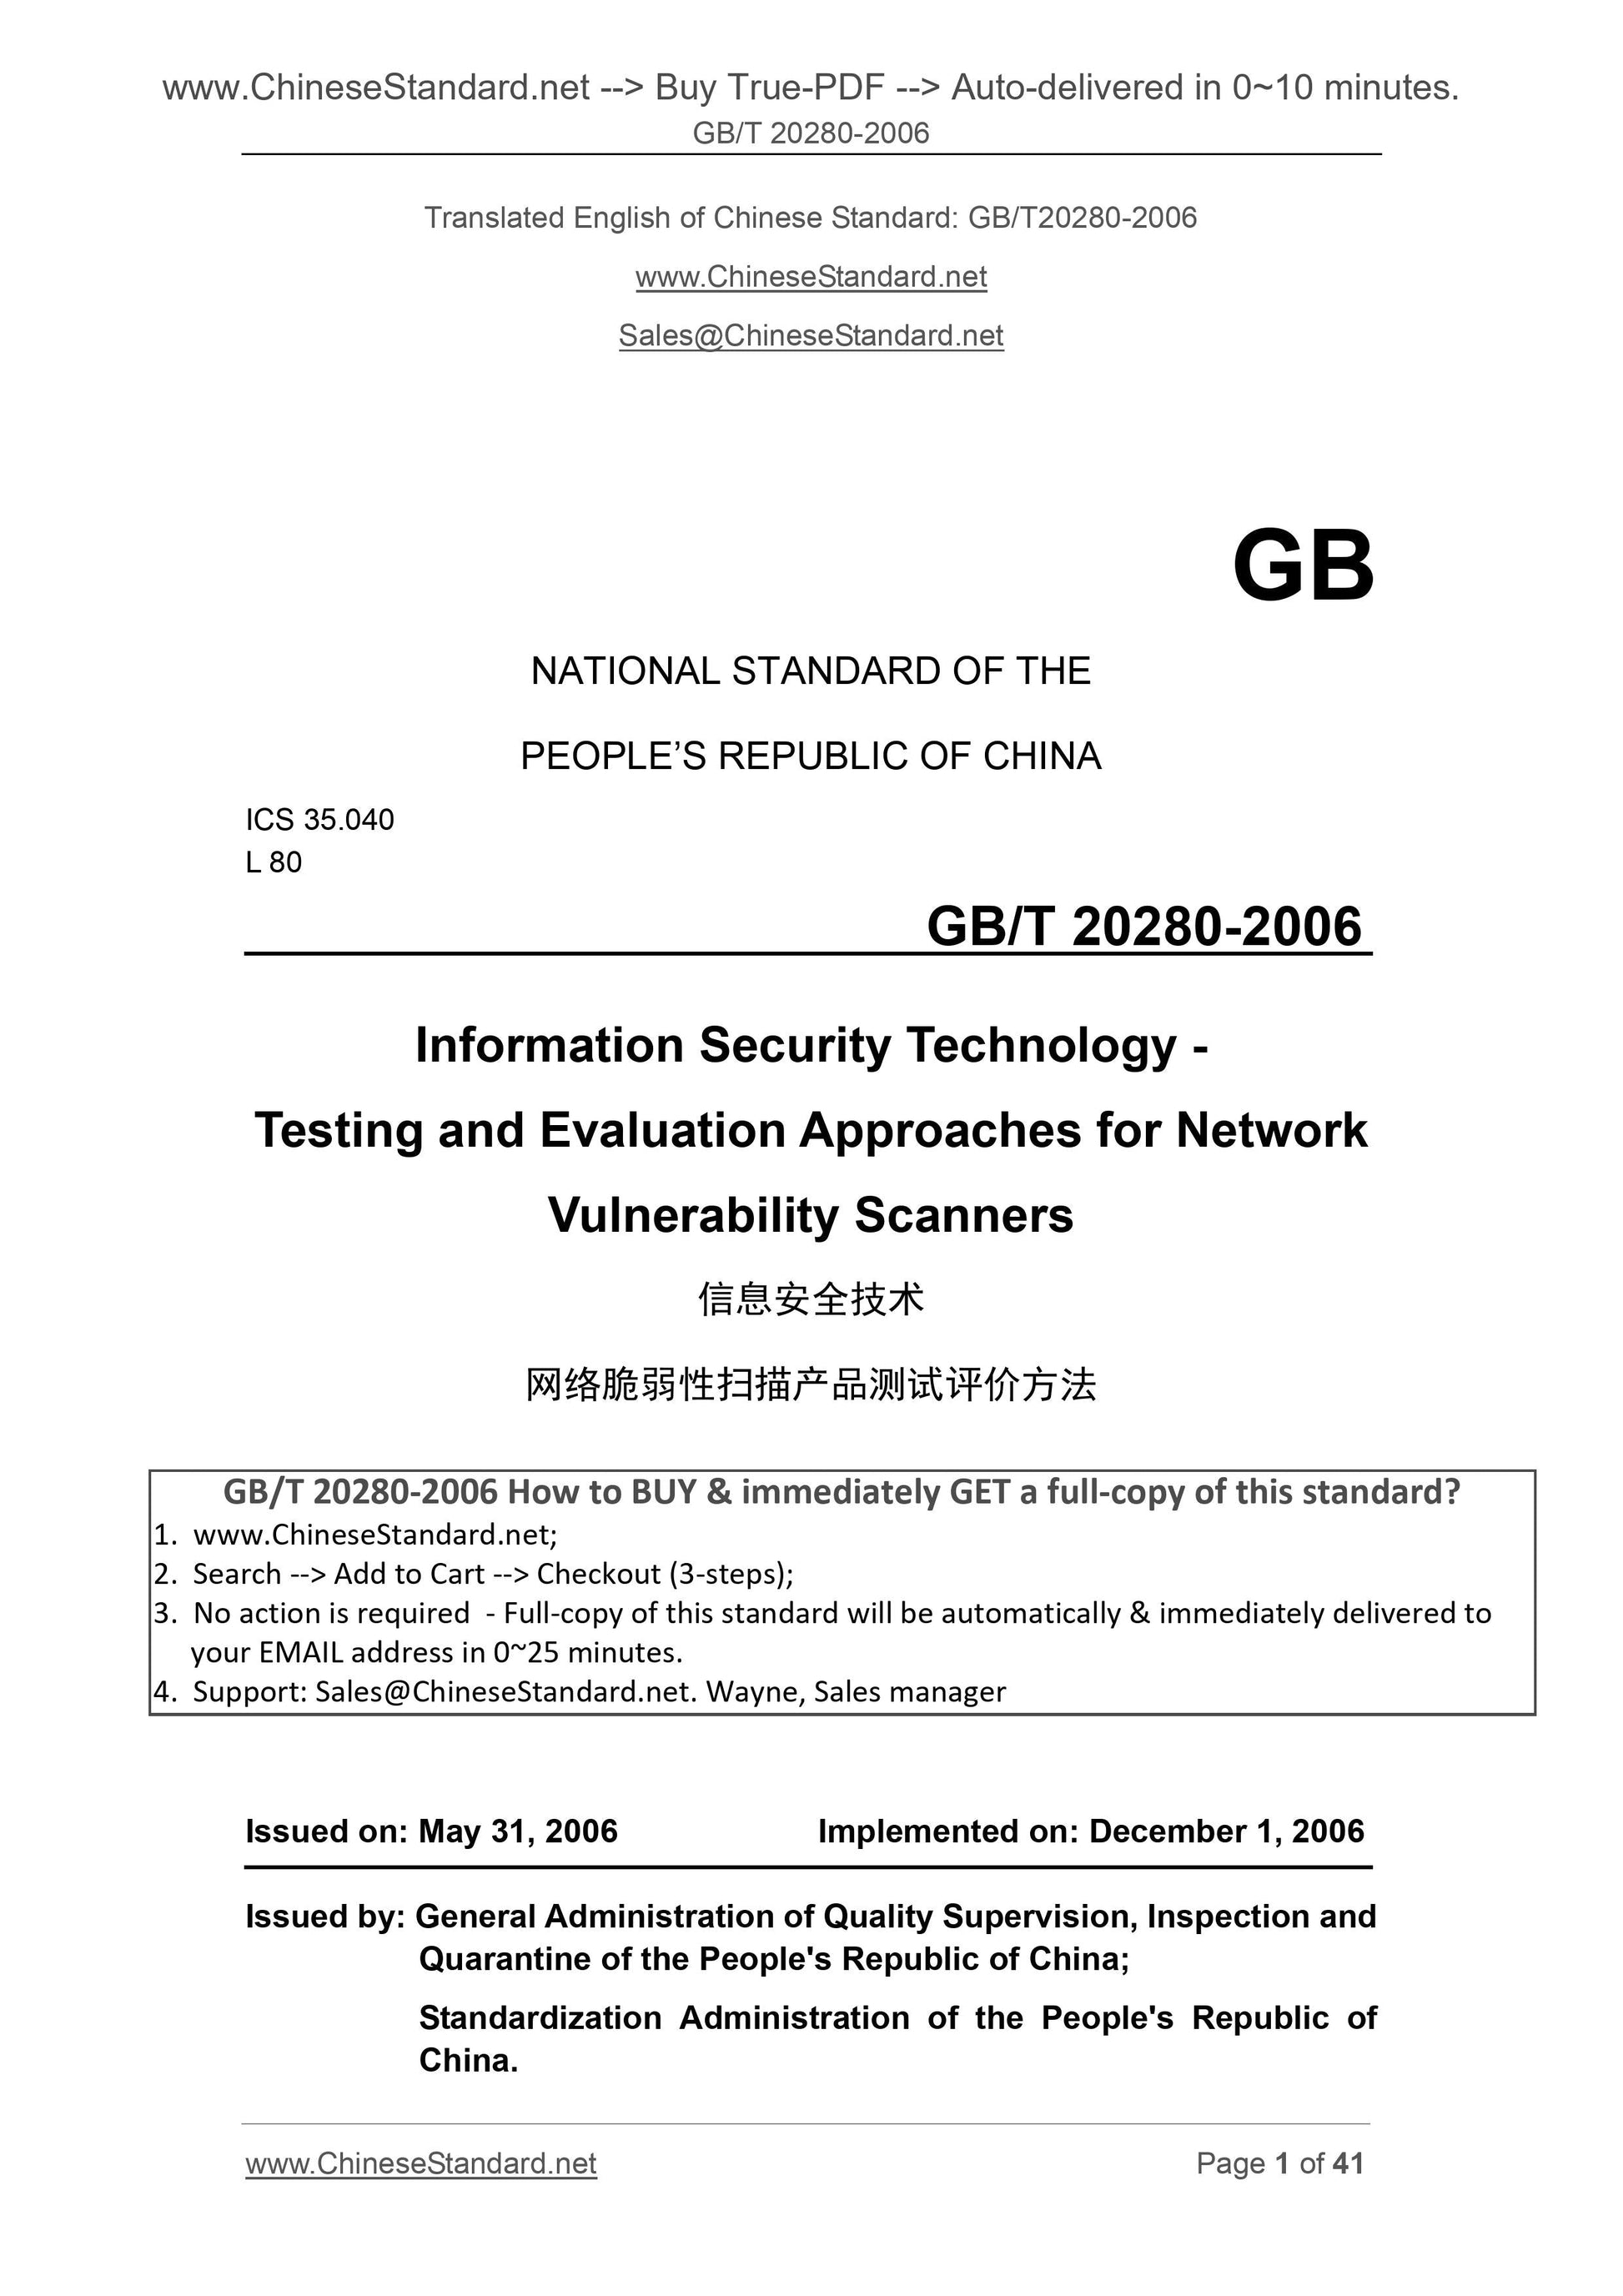 GB/T 20280-2006 Page 1